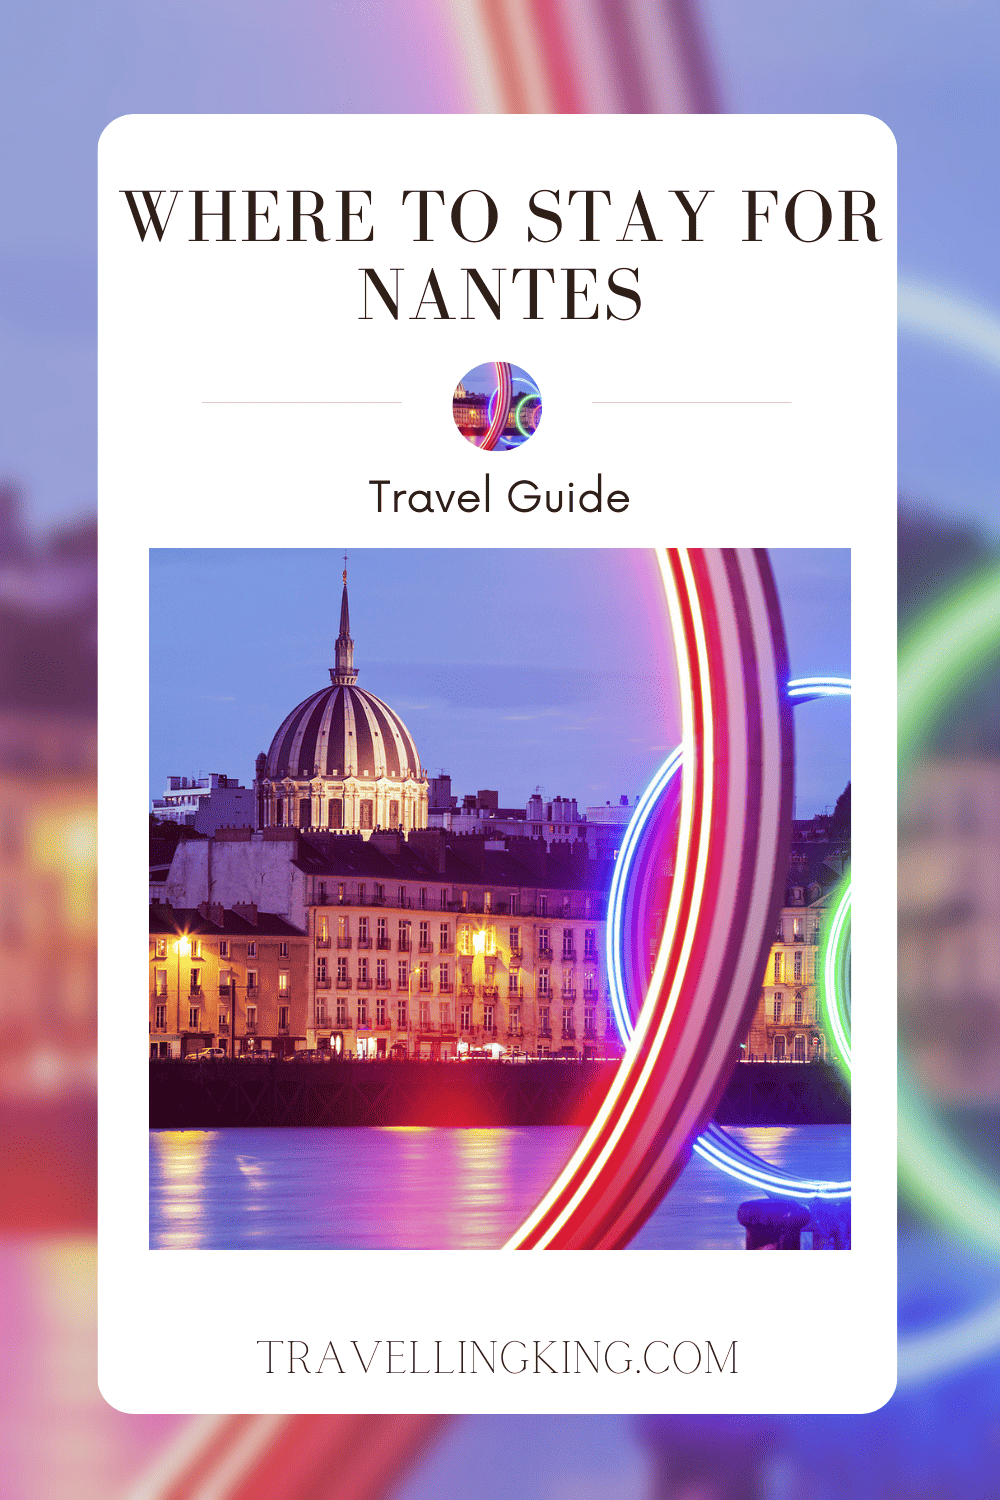 Where to stay for Nantes